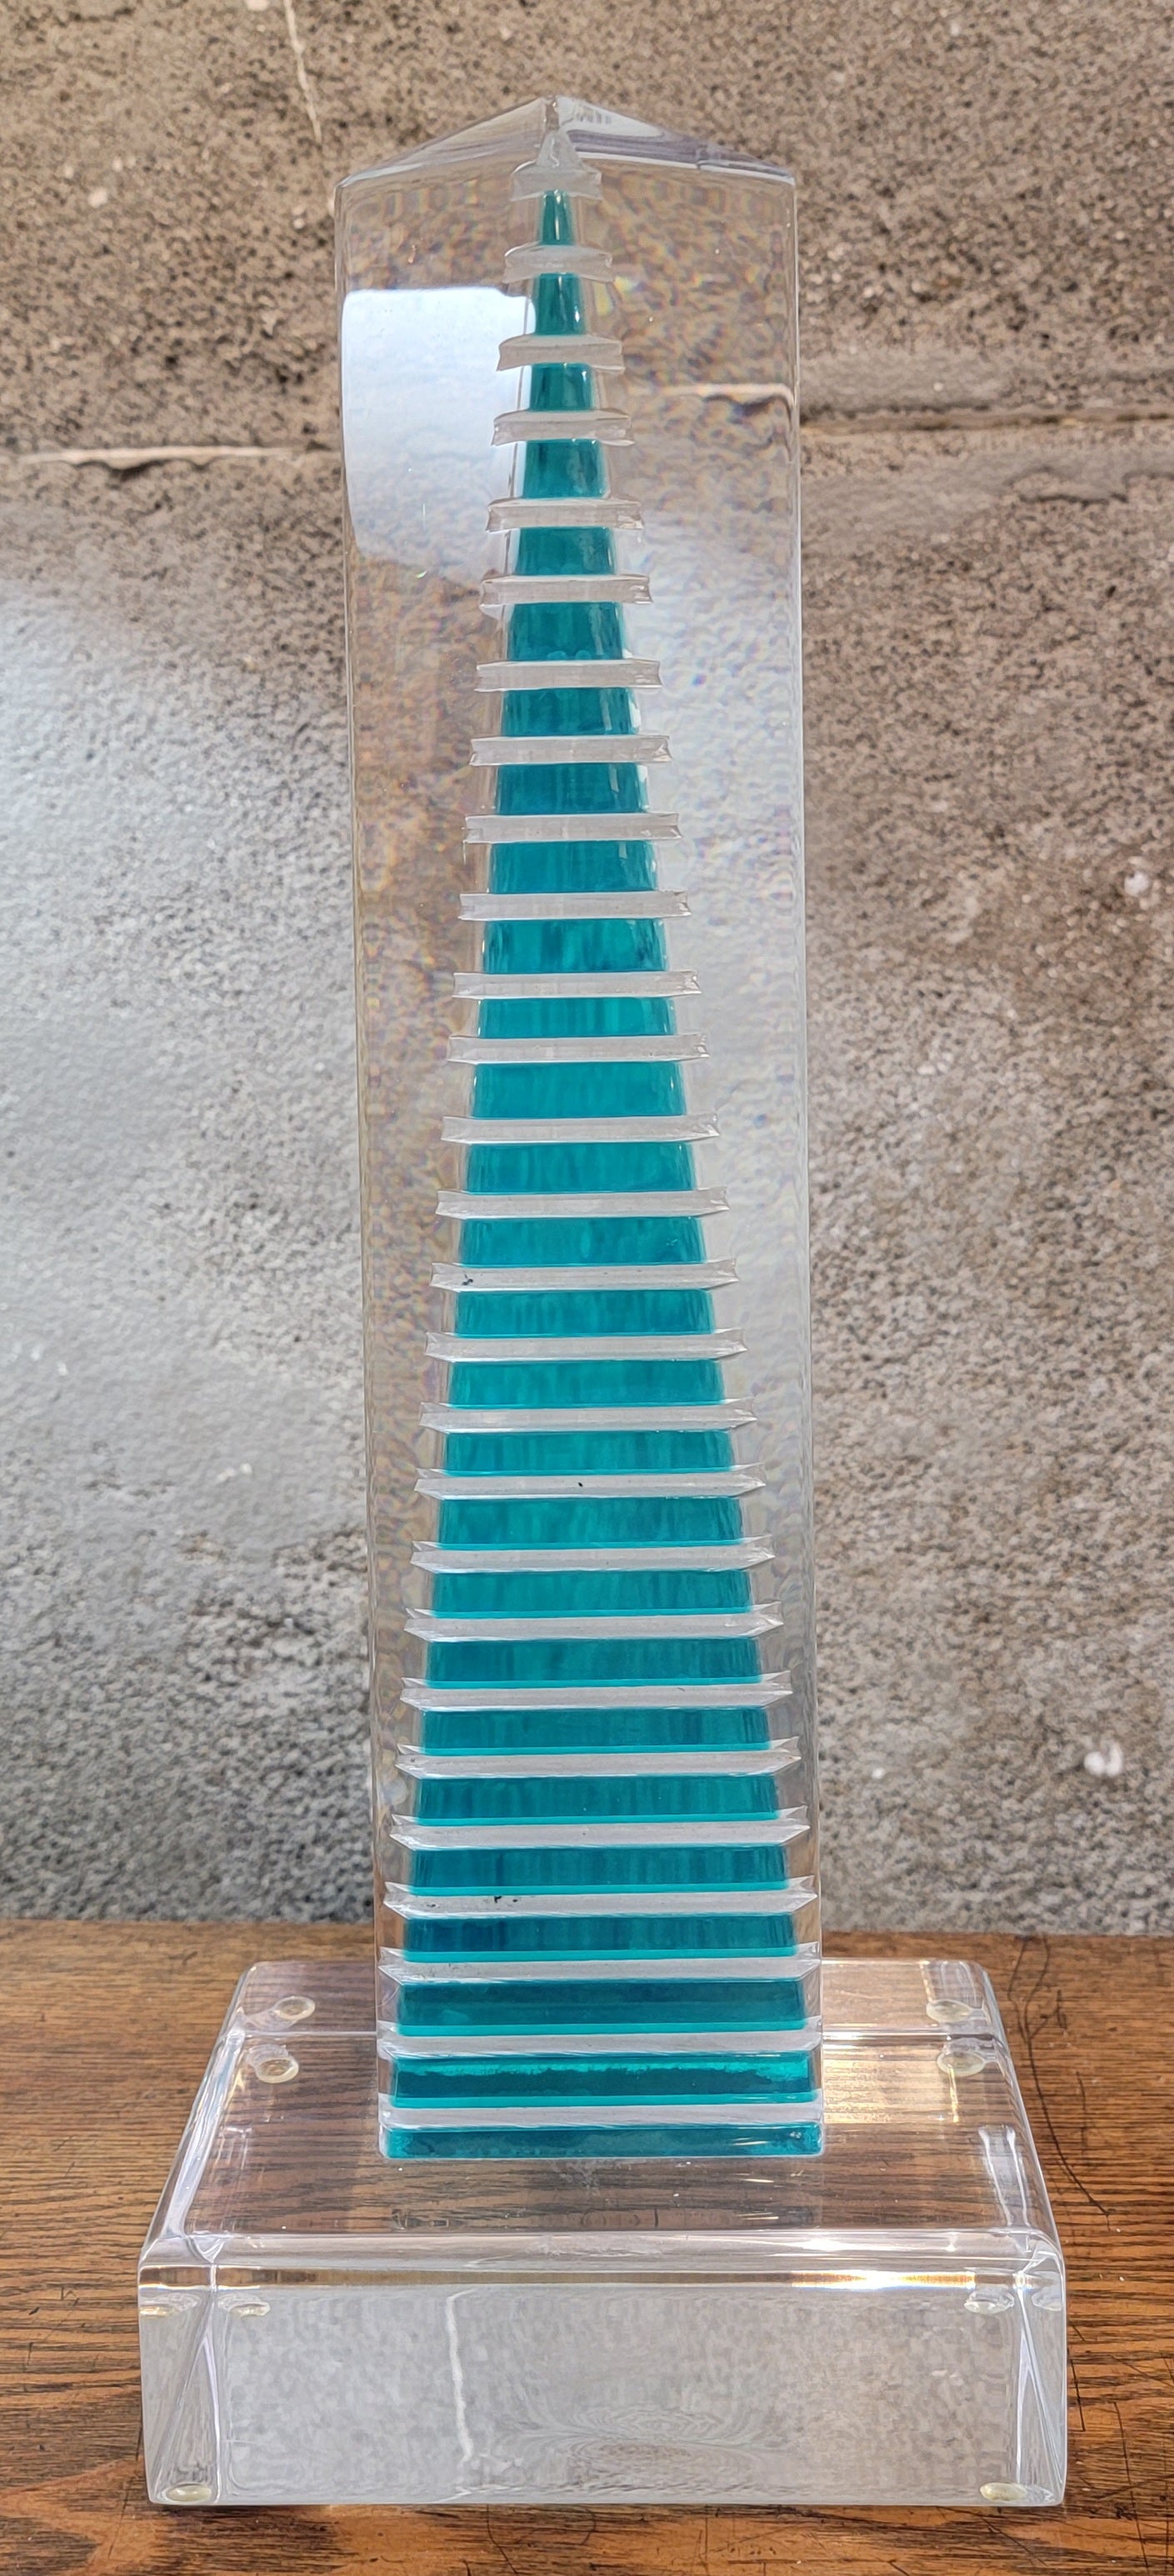 A Lucite or acrylic geometric sculpture. Diminishing aqua rectangles in clear Lucite monolith create an architectural skyscraper effect. Stands 15.75